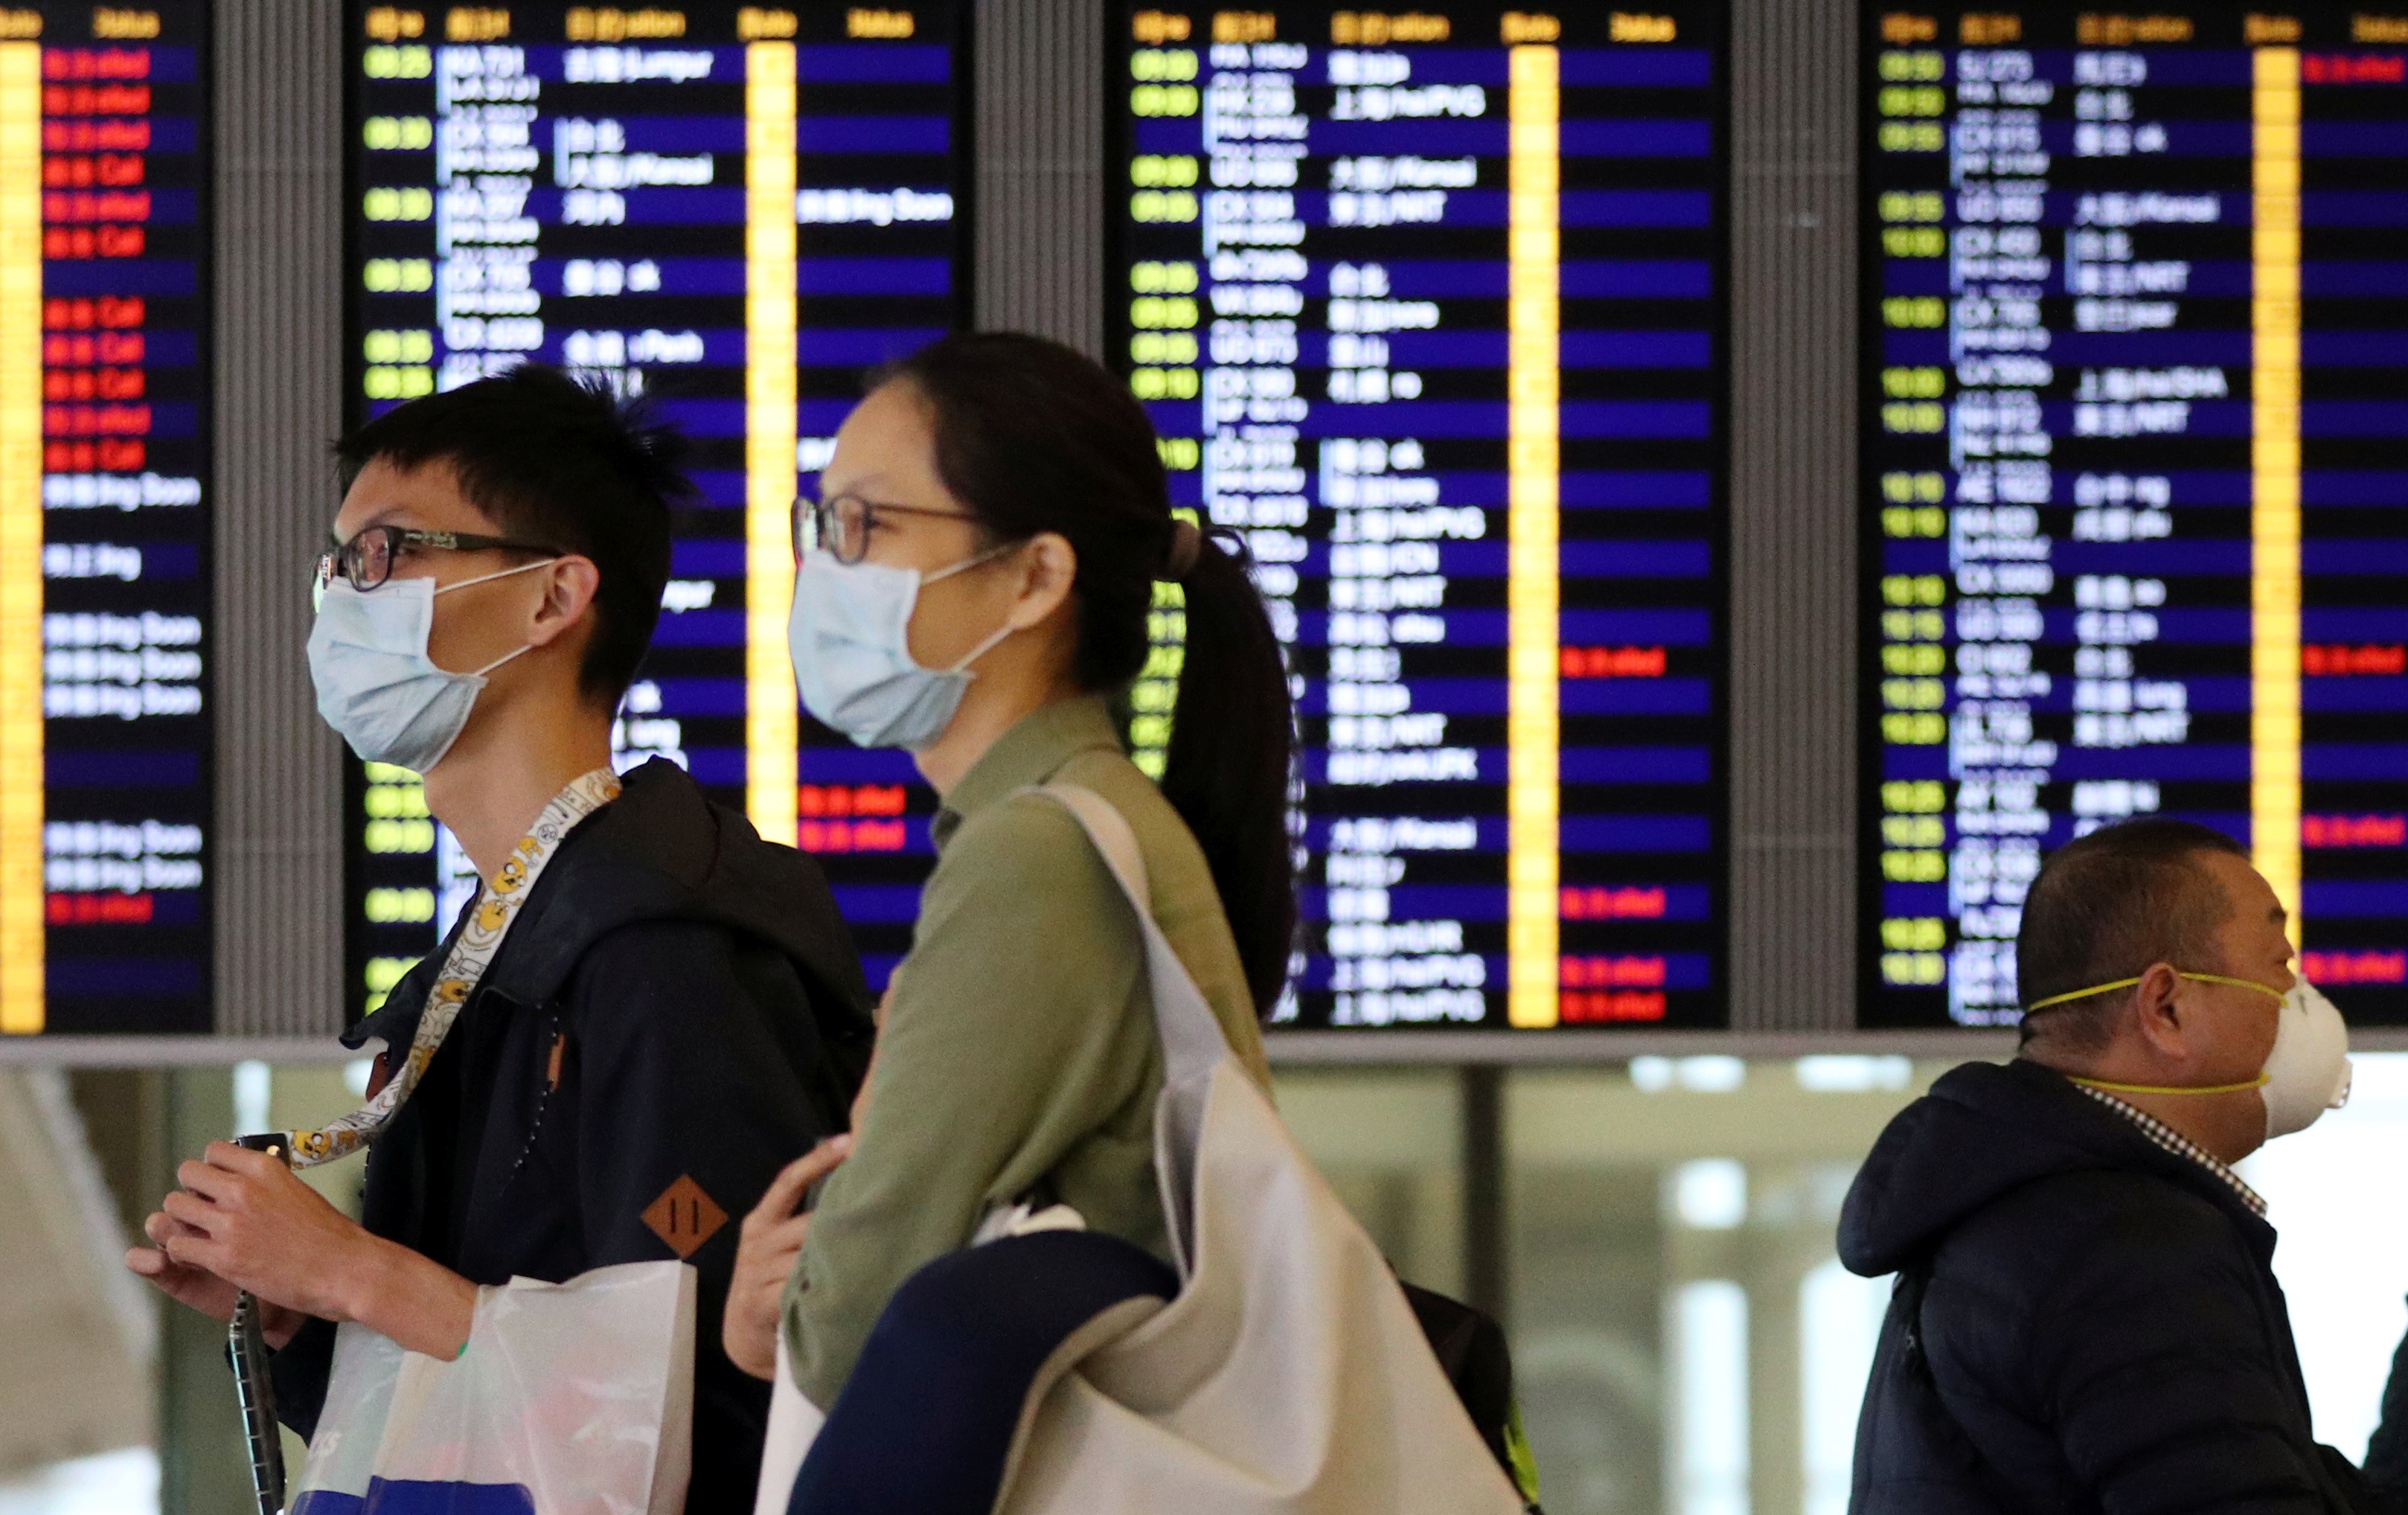 The air industry in Hong Kong and beyond has been thrown into disarray by the coronavirus outbreak. Photo: Reuters